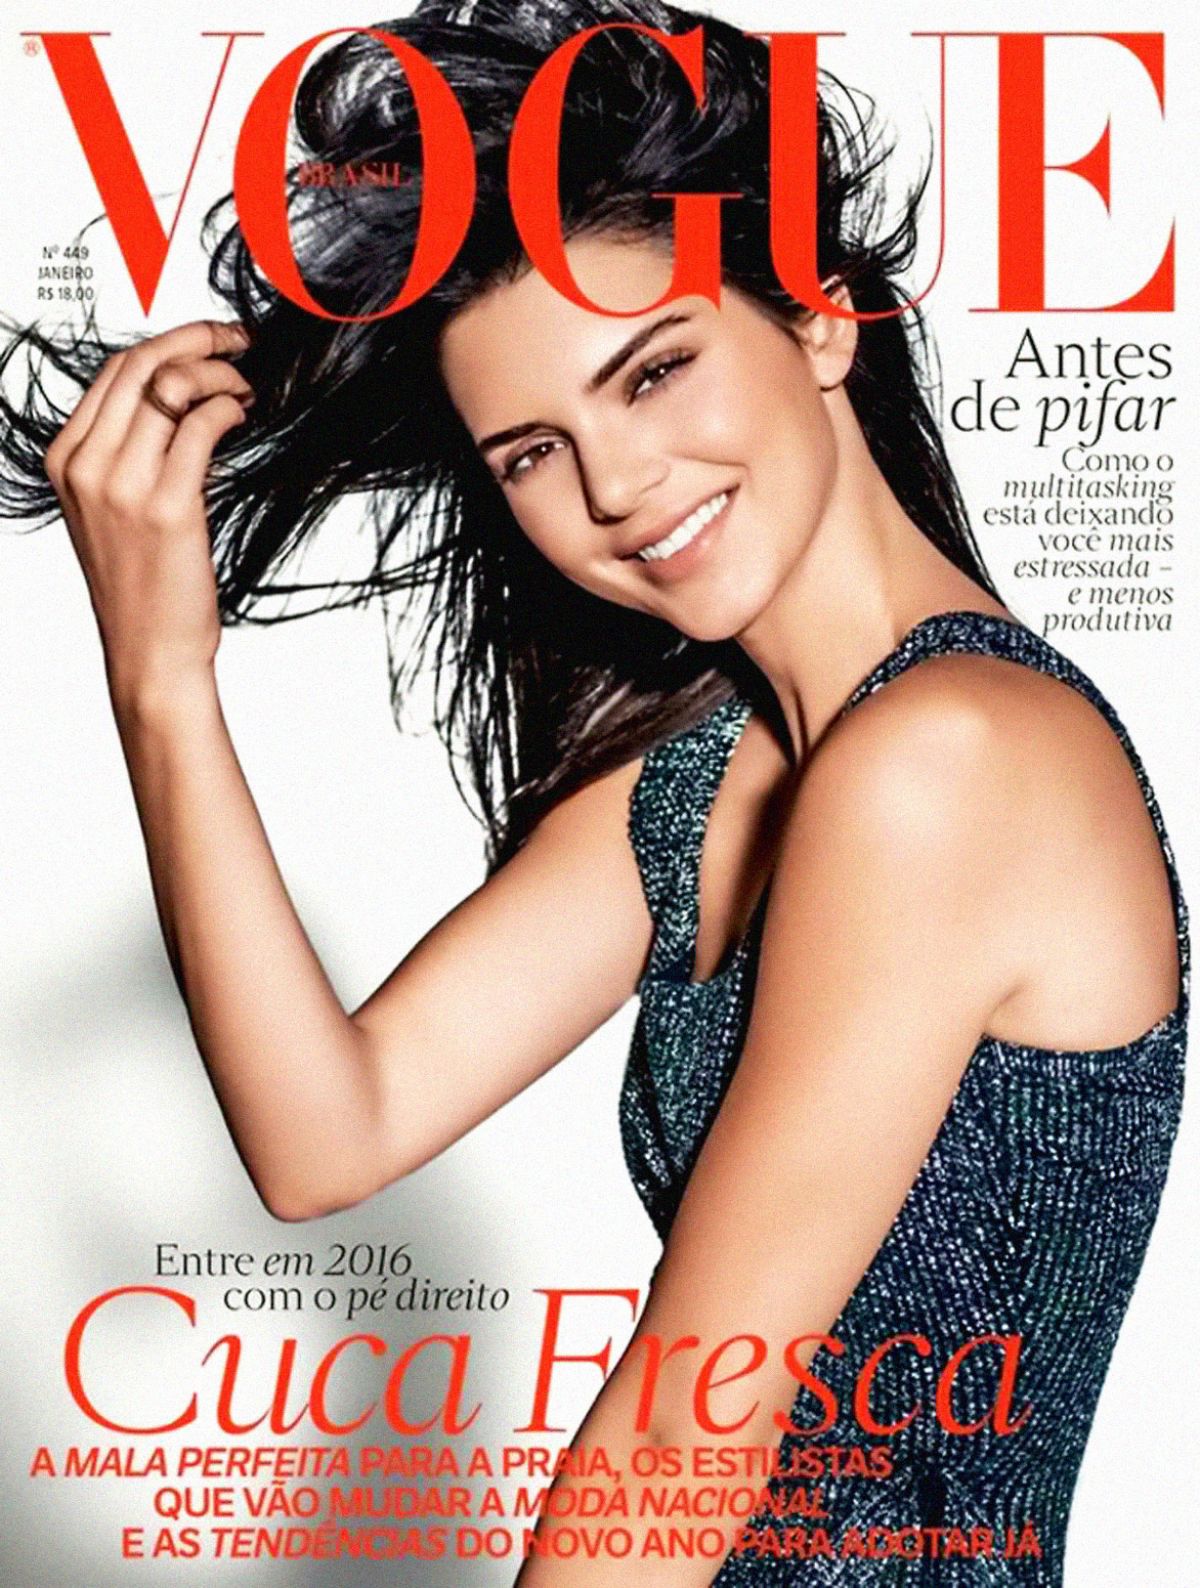 KENDALL JENNER in Vouge Magazine, Brazil January 2016 Issue - HawtCelebs